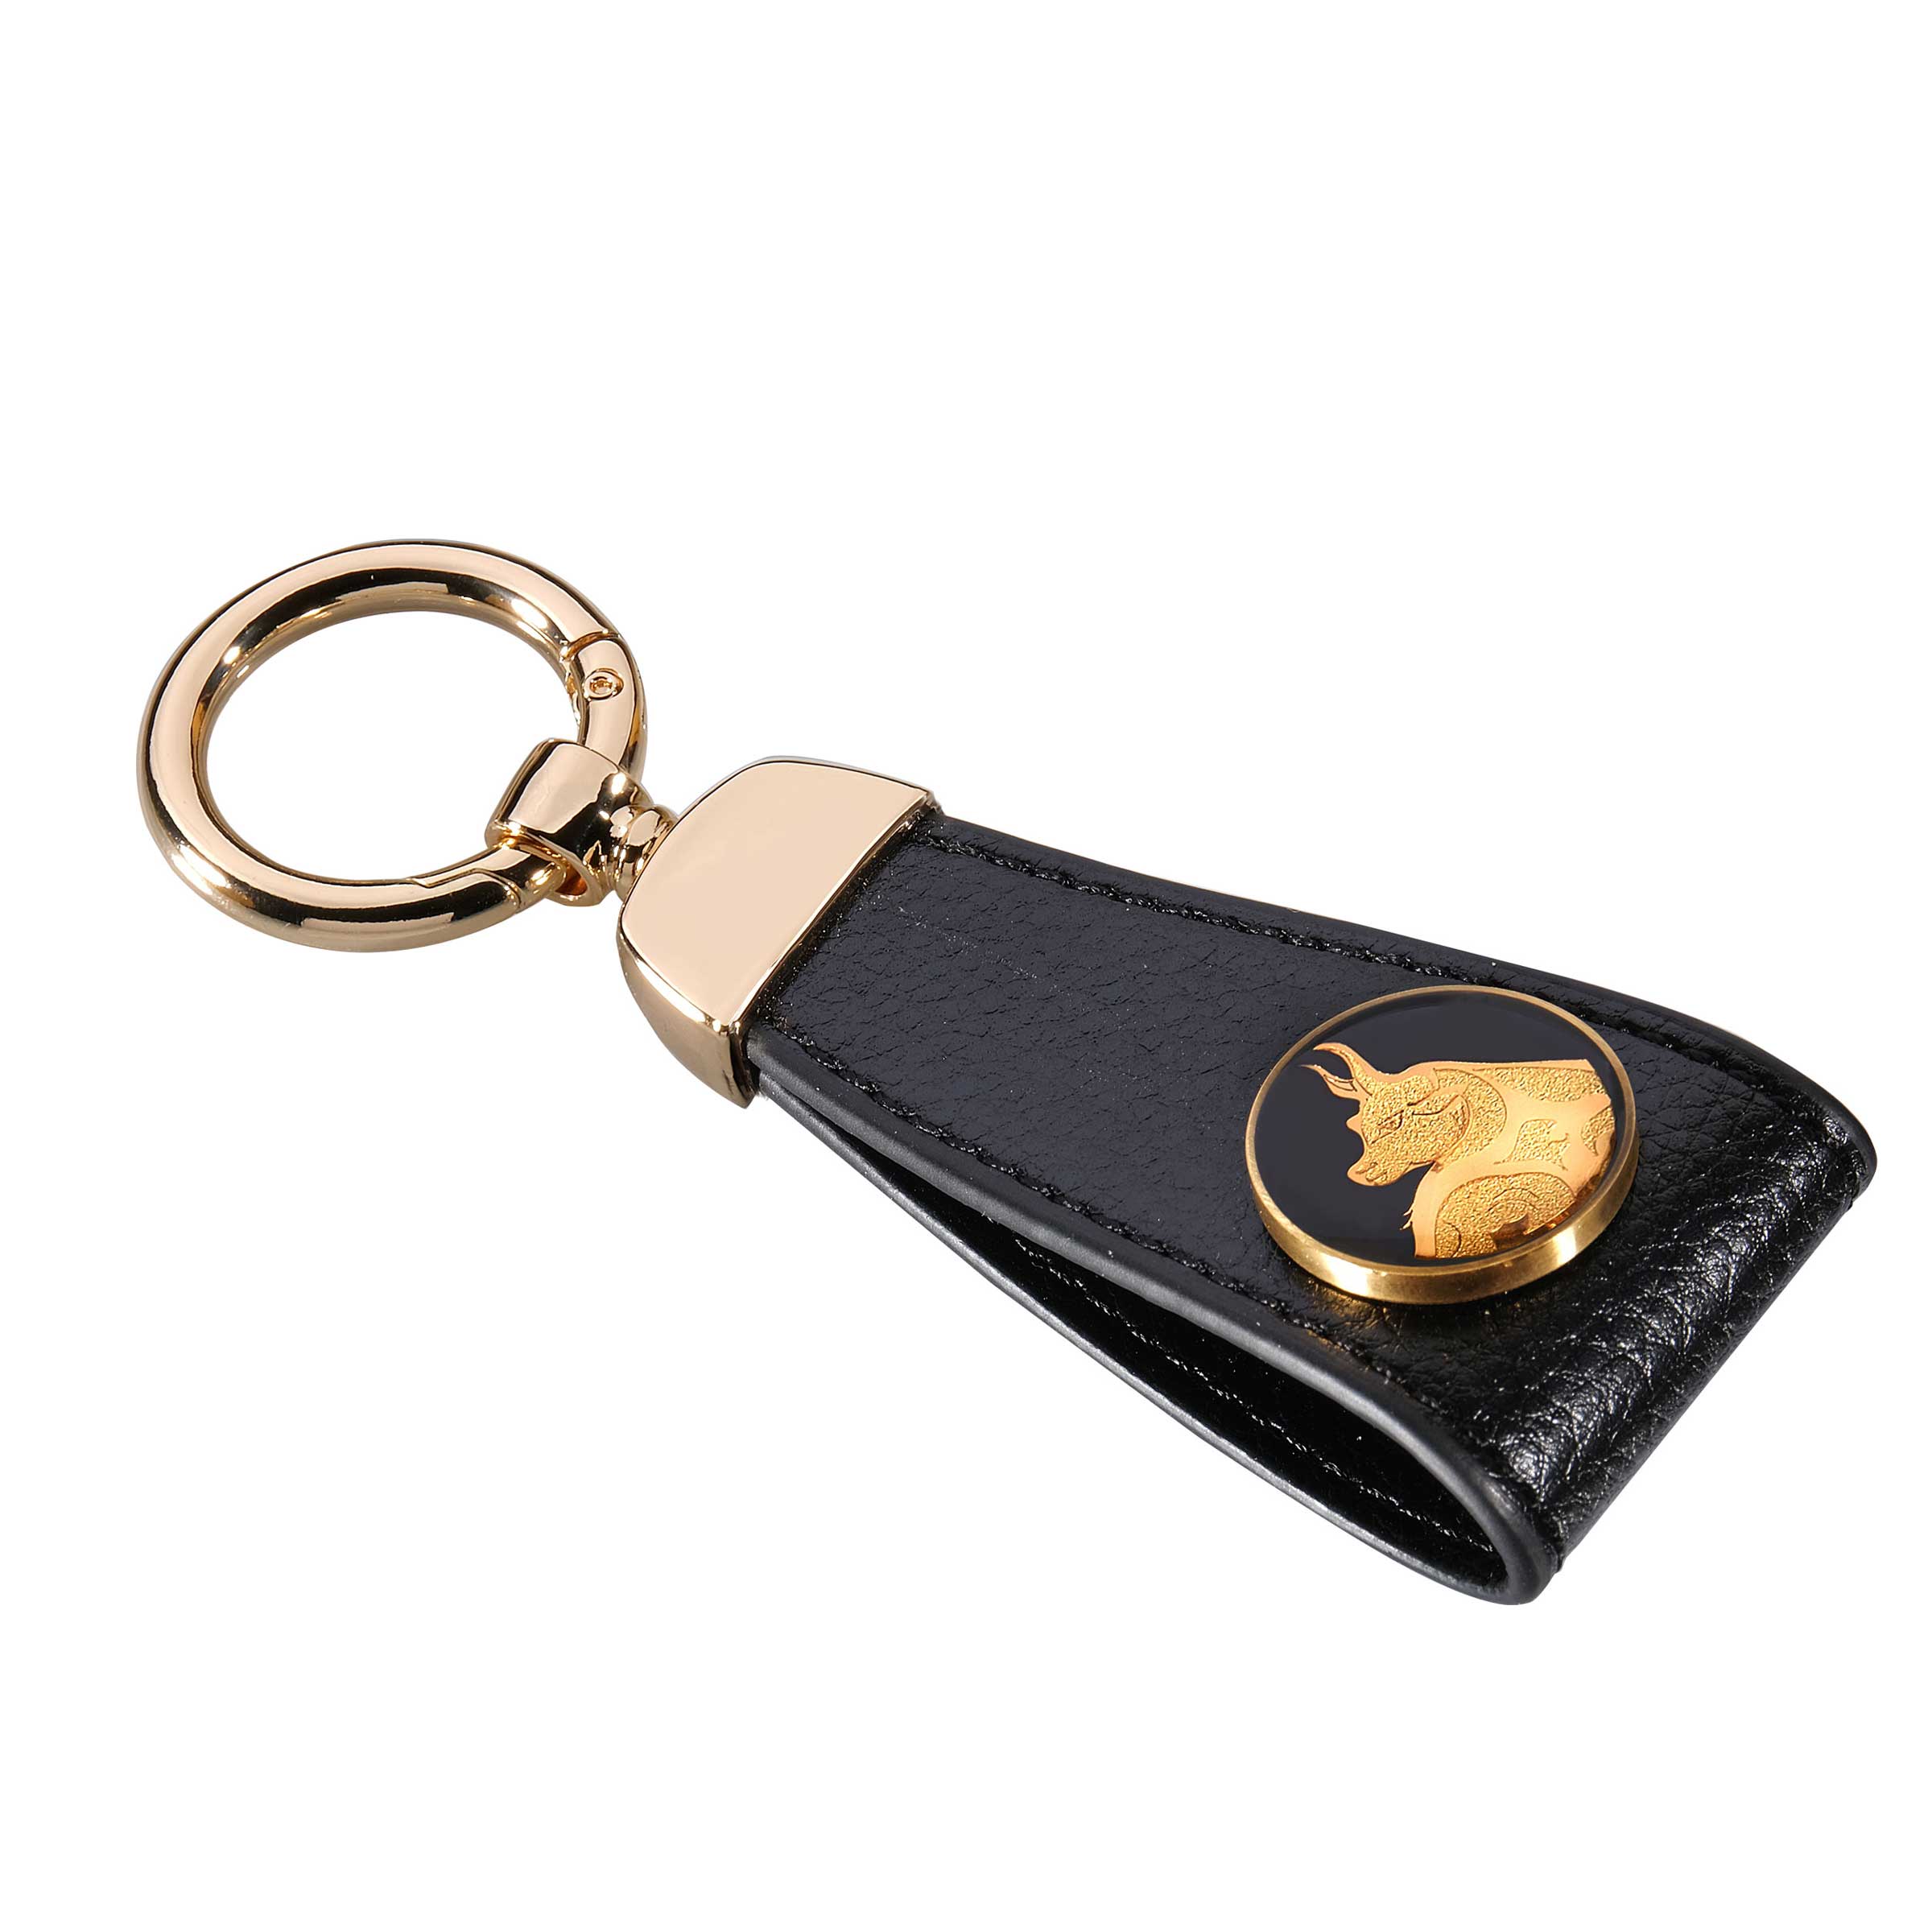 Jasouichi leather and 24 carat gold leaf with the symbol design of May